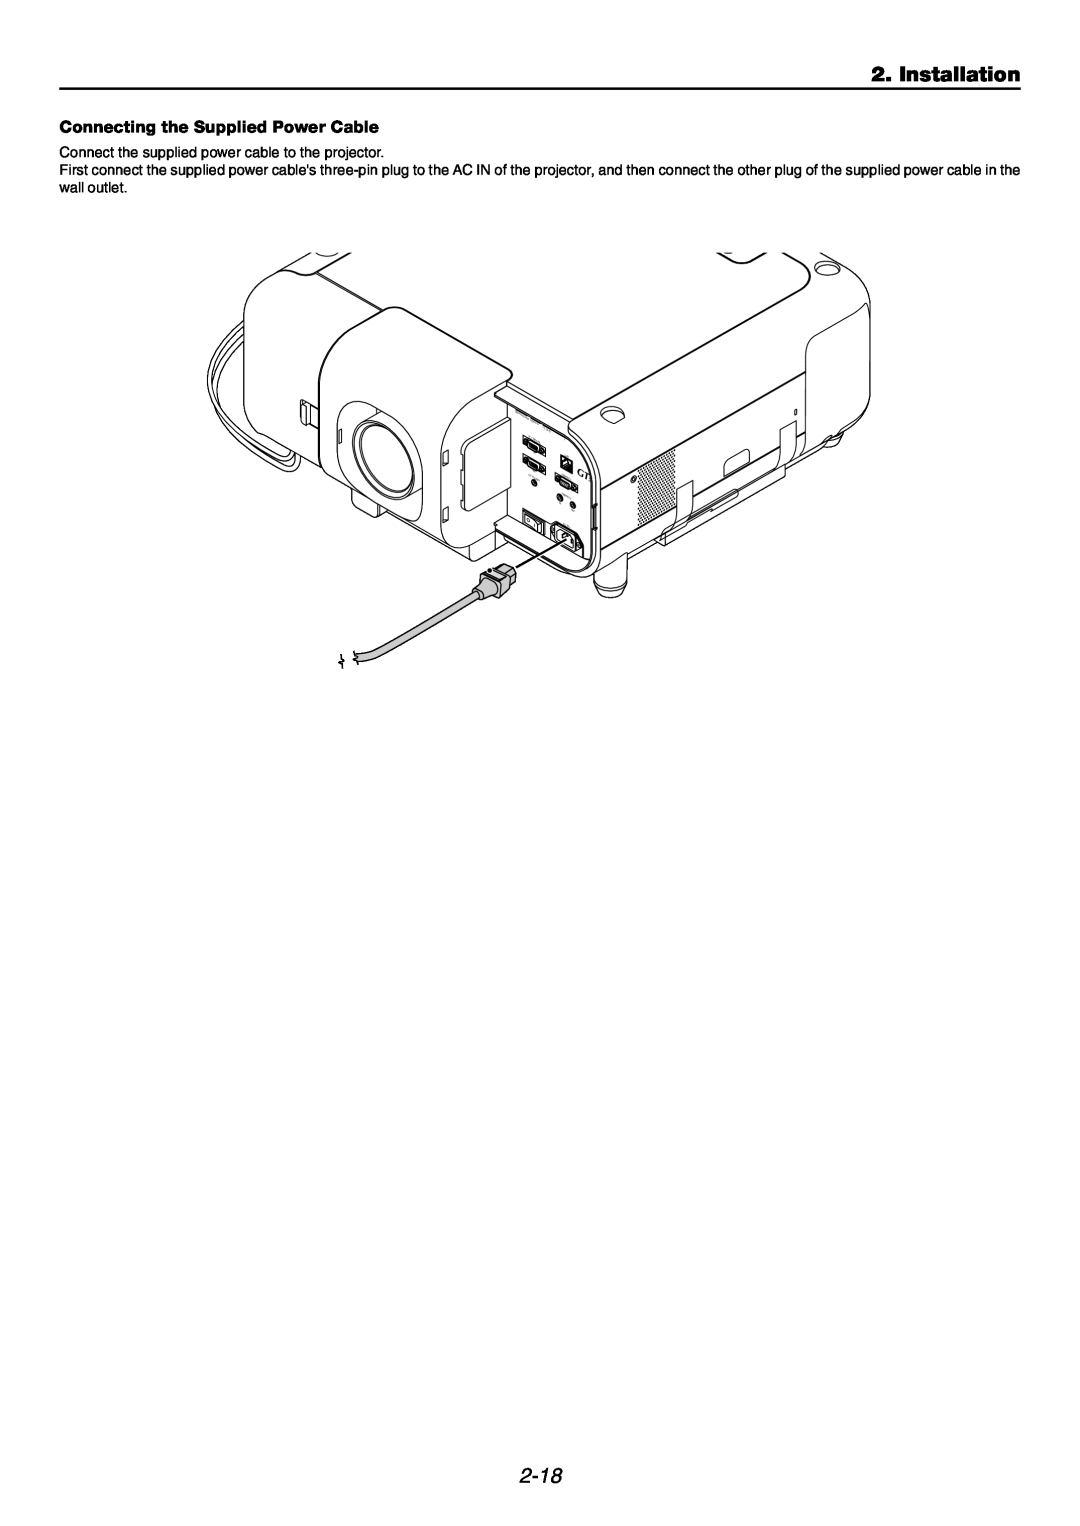 NEC GT6000 user manual Installation, 2-18, Connecting the Supplied Power Cable 